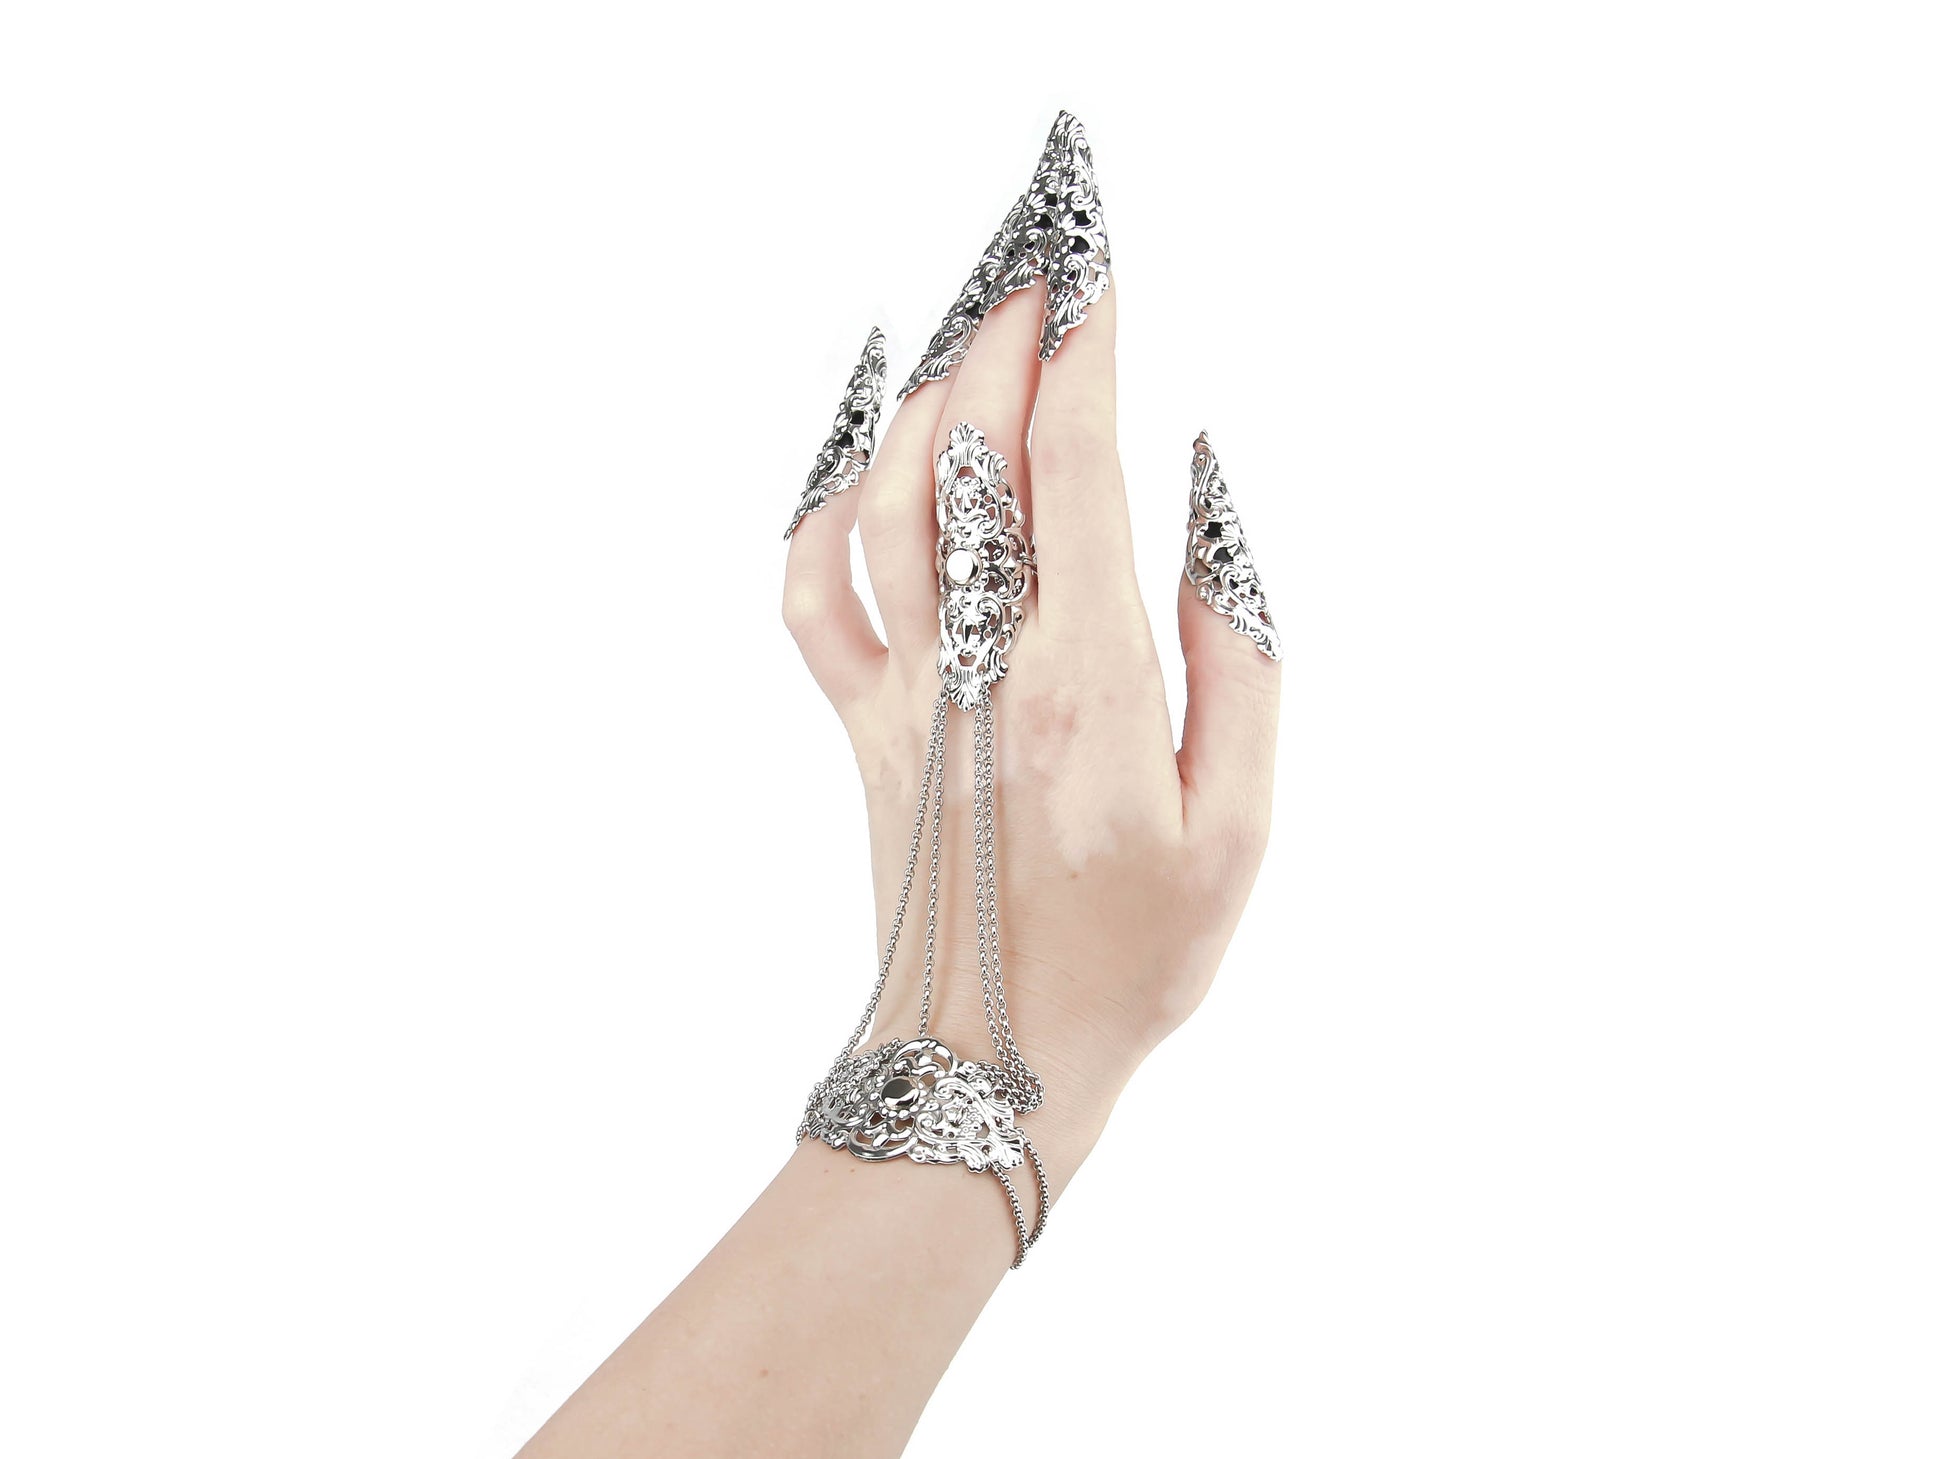 A stunning silver hand chain adornment with a gothic-inspired design is shown off on a hand adorned with sharp nail claws, capturing the essence of goth fashion. The piece boasts intricate filigree metalwork that adorns the back of the hand, while chains elegantly connect the bracelet portion to the middle finger ring. The background is a crisp white, emphasizing the refined and mysterious charm of this meticulously crafted creation.